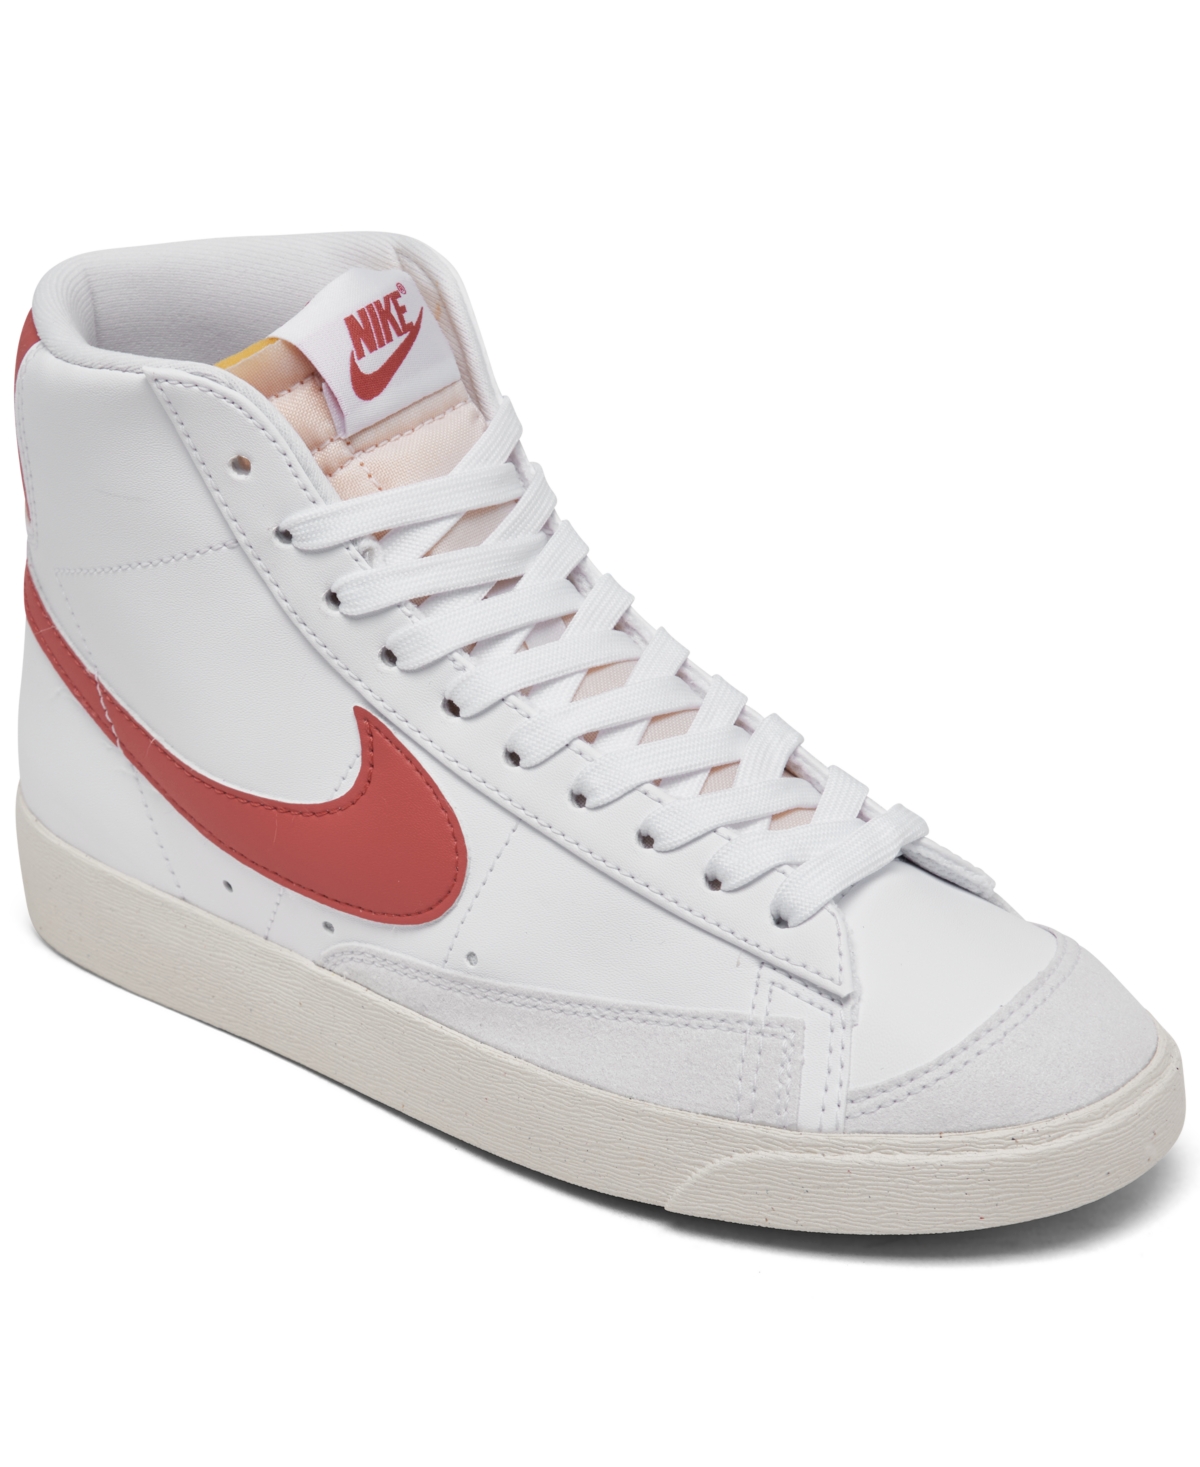 Women's Blazer Mid 77 Casual Sneakers from Finish Line - White, Adobe